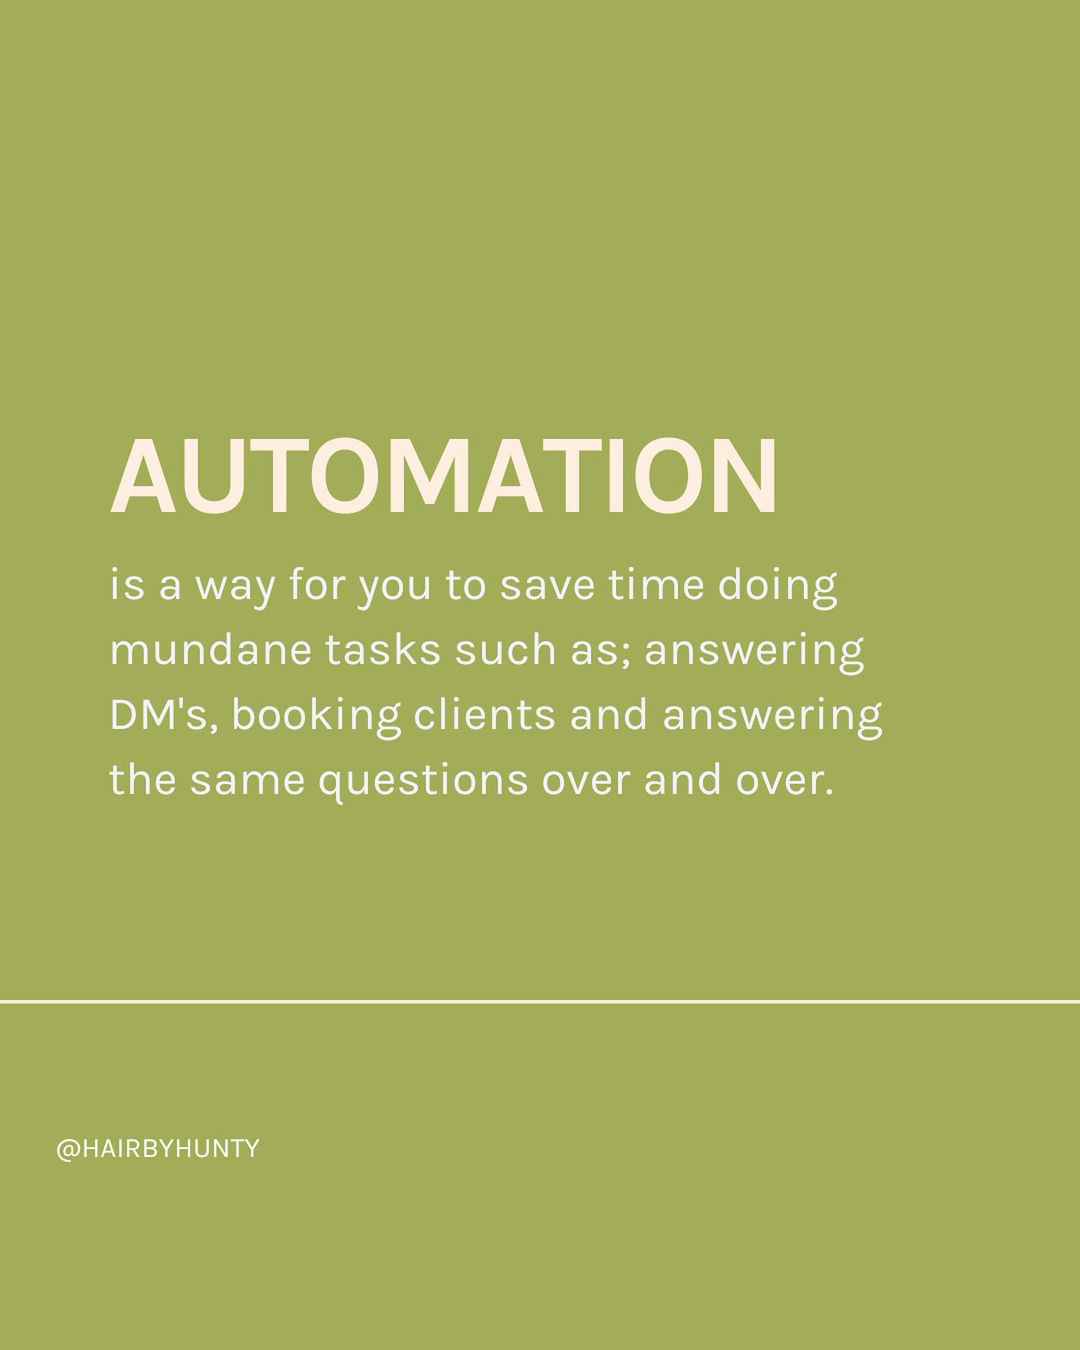 Automation is a way for you to save time doing mundane tasks such as; answering DM's, booking clients and answering the same questions over and over.